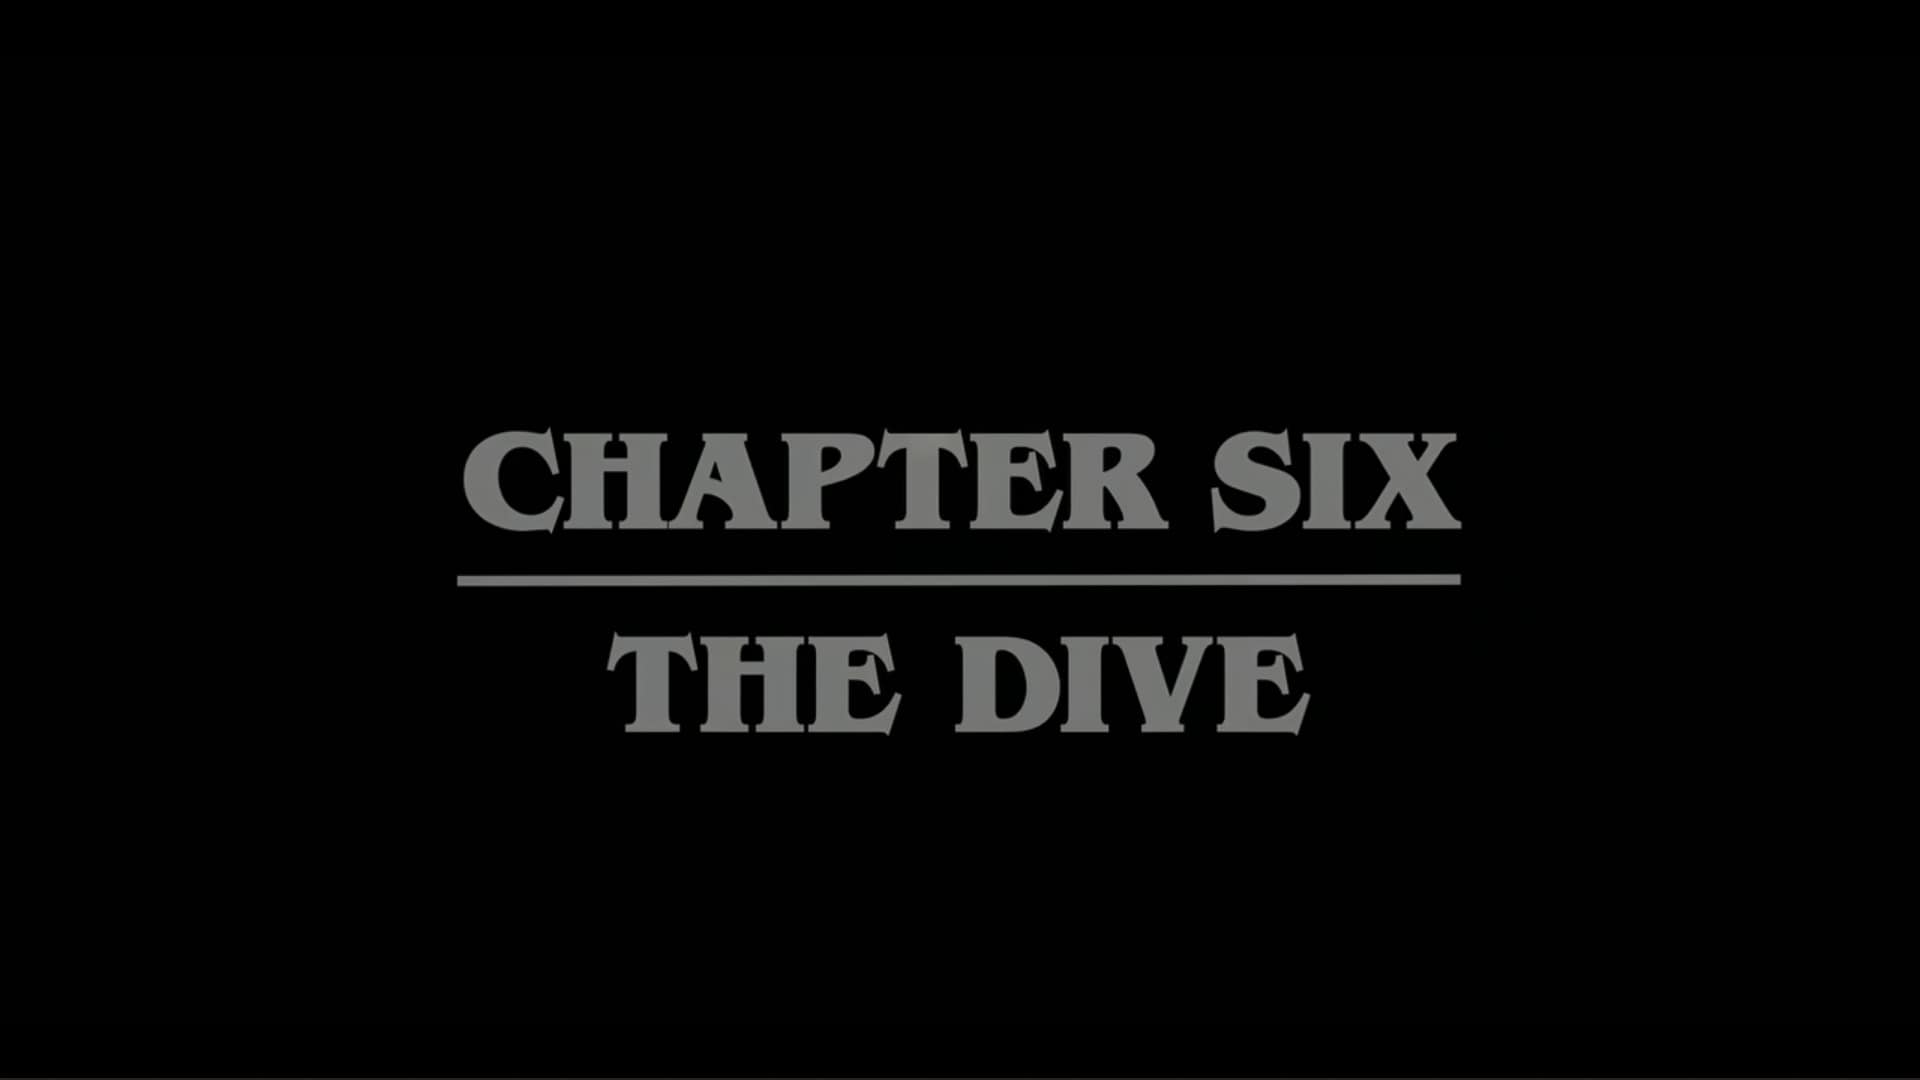 Stranger Things: Season 4/ Episode 6 “Chapter Six: The Dive” – Recap/ Review (with Spoilers)